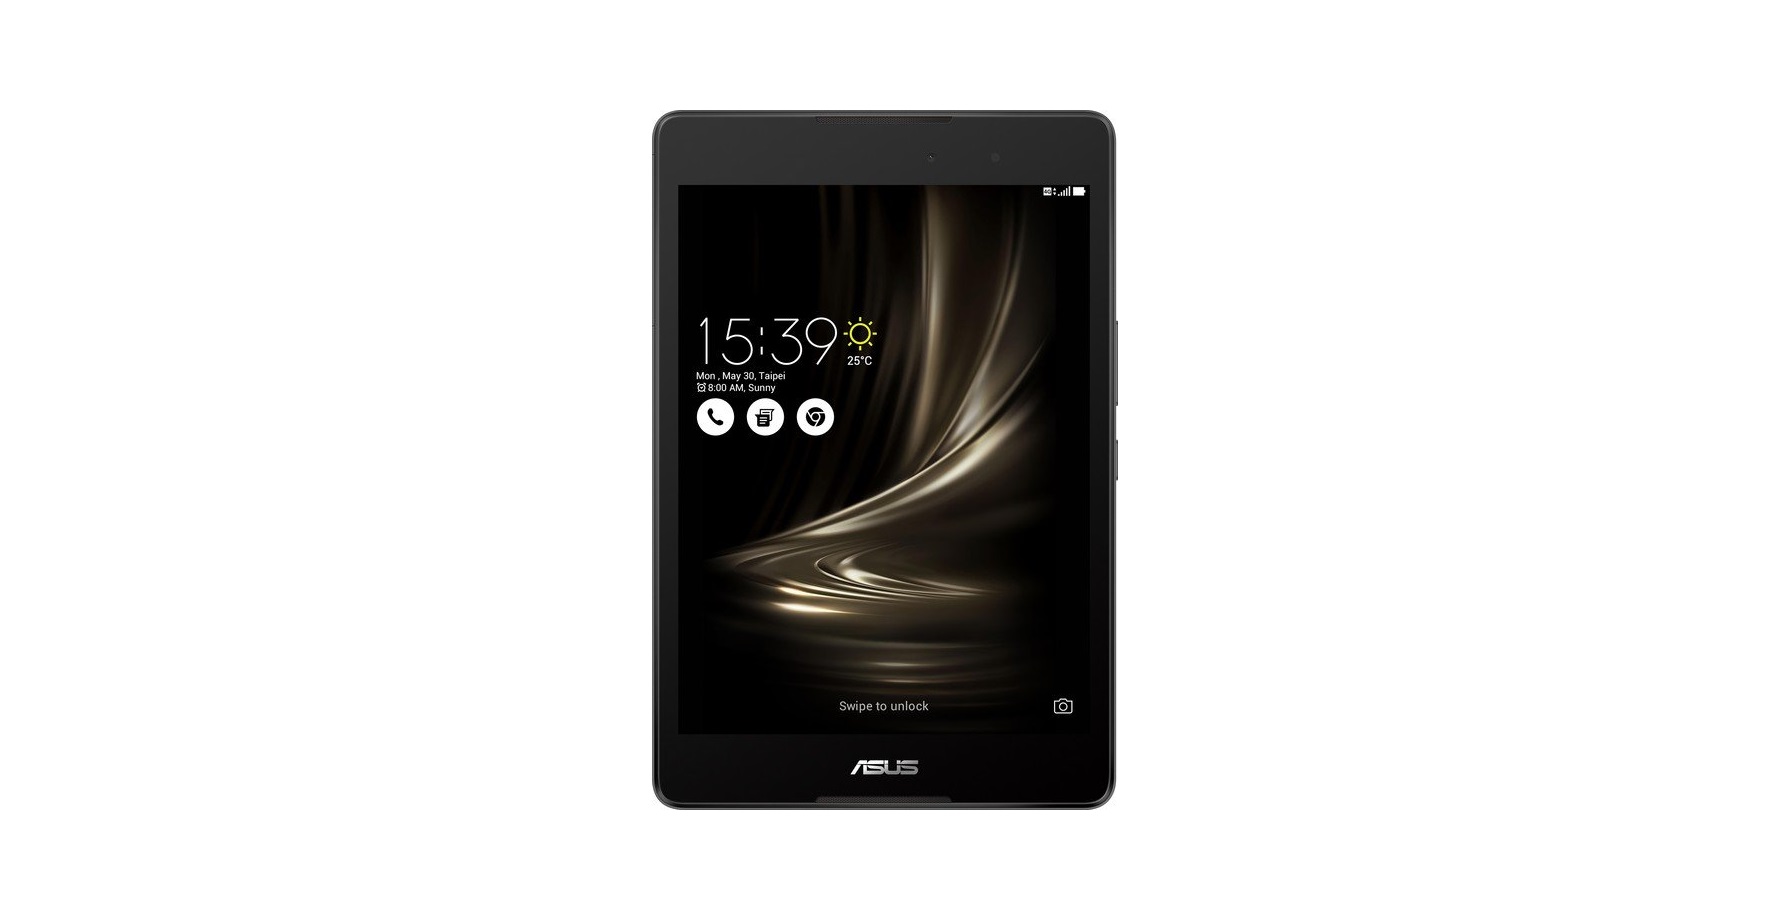 How To Fix Asus Zenpad 3s 8.0 Not Charging [Troubleshooting Guide]